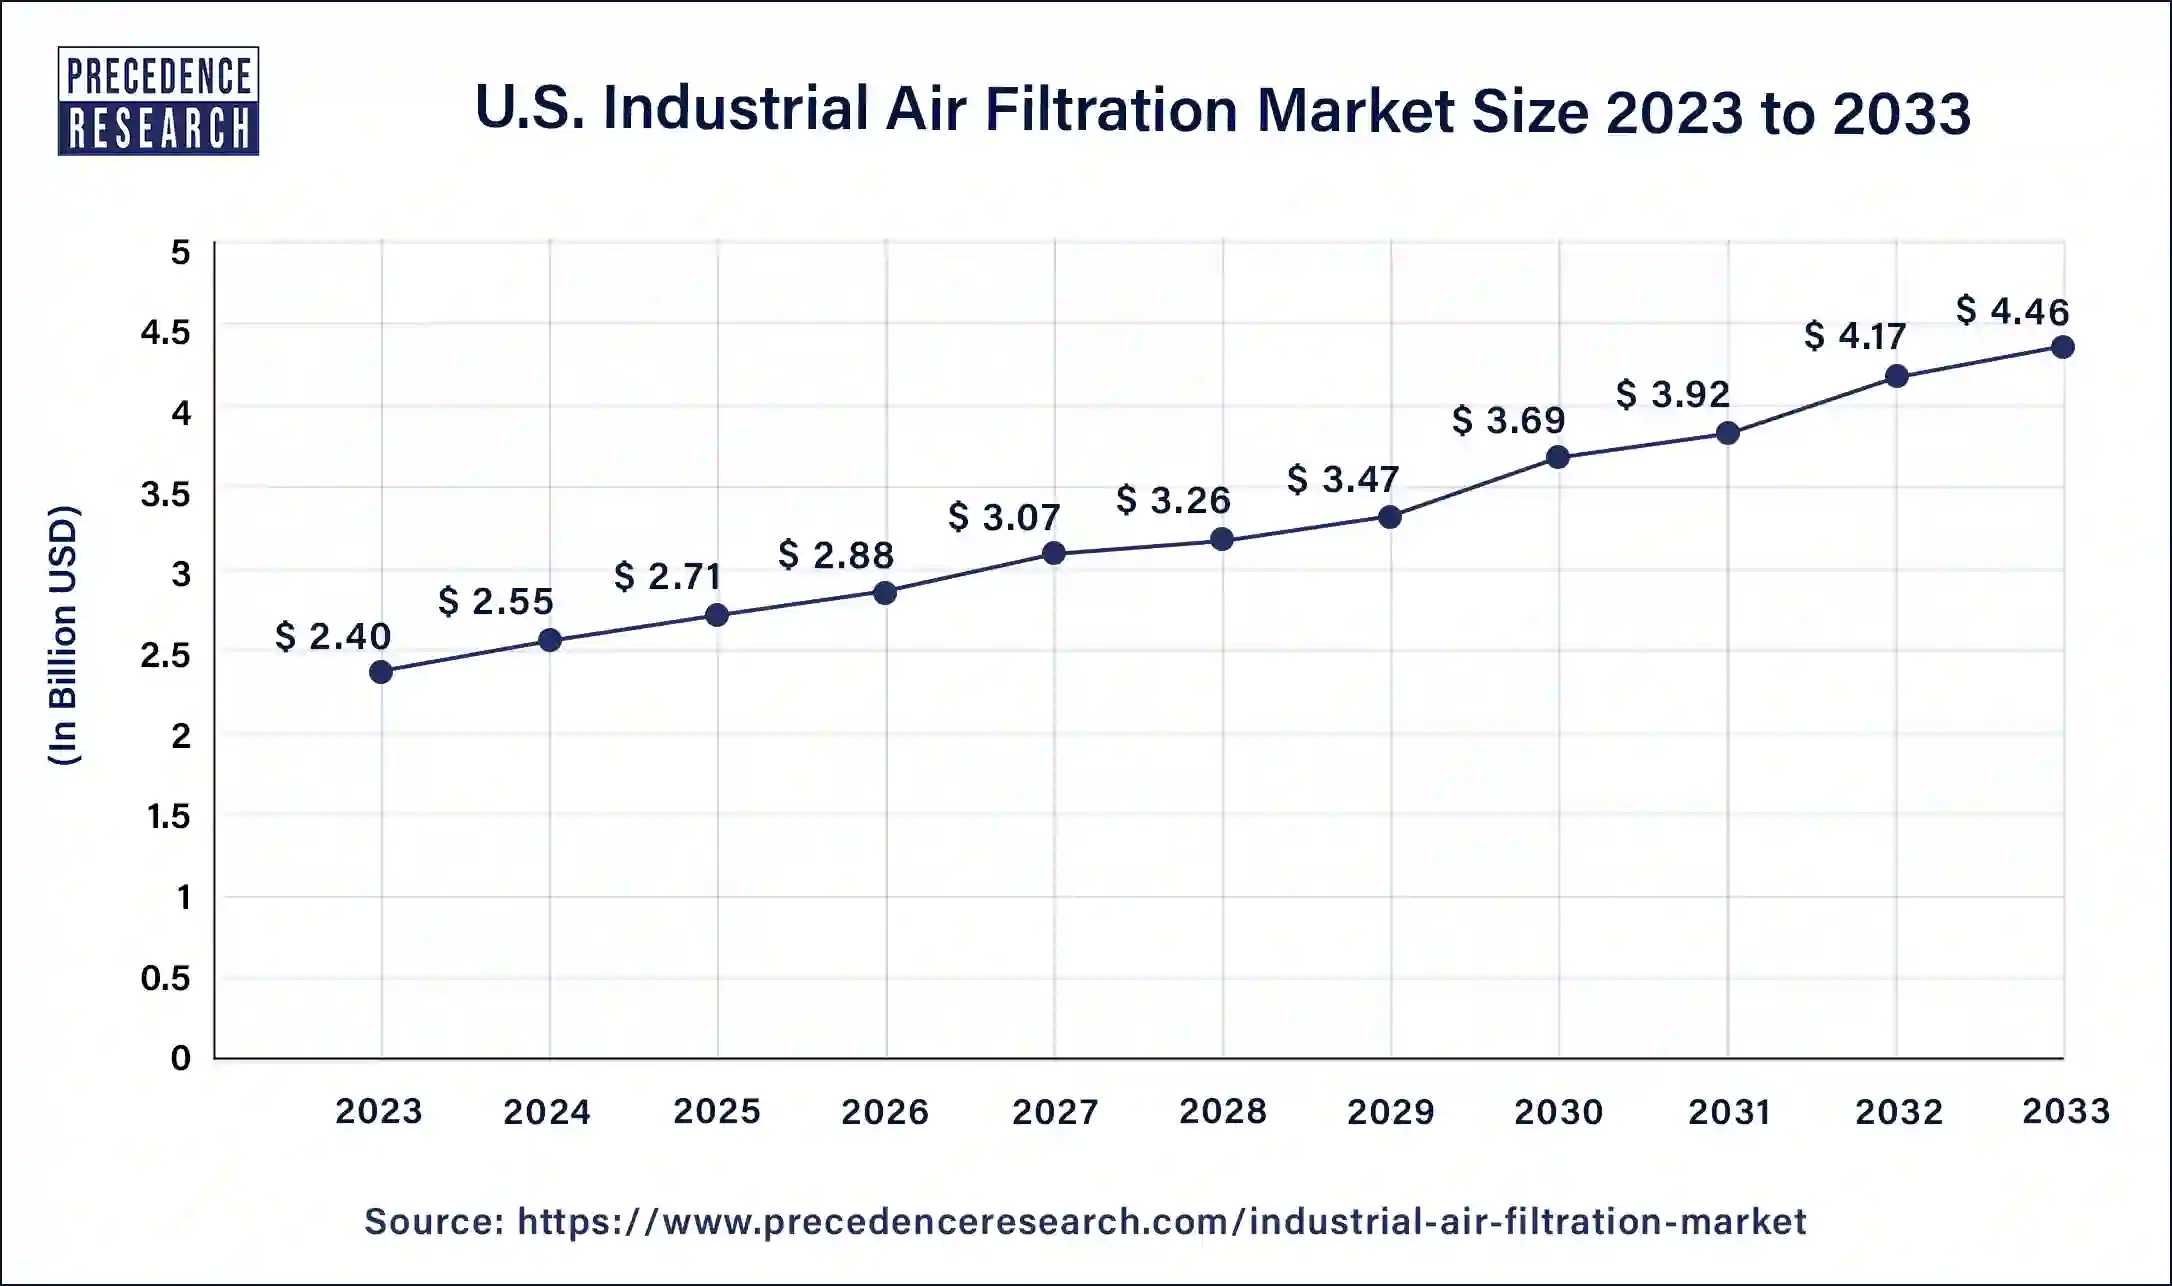 U.S. Industrial Air Filtration Market Size in 2024 to 2033